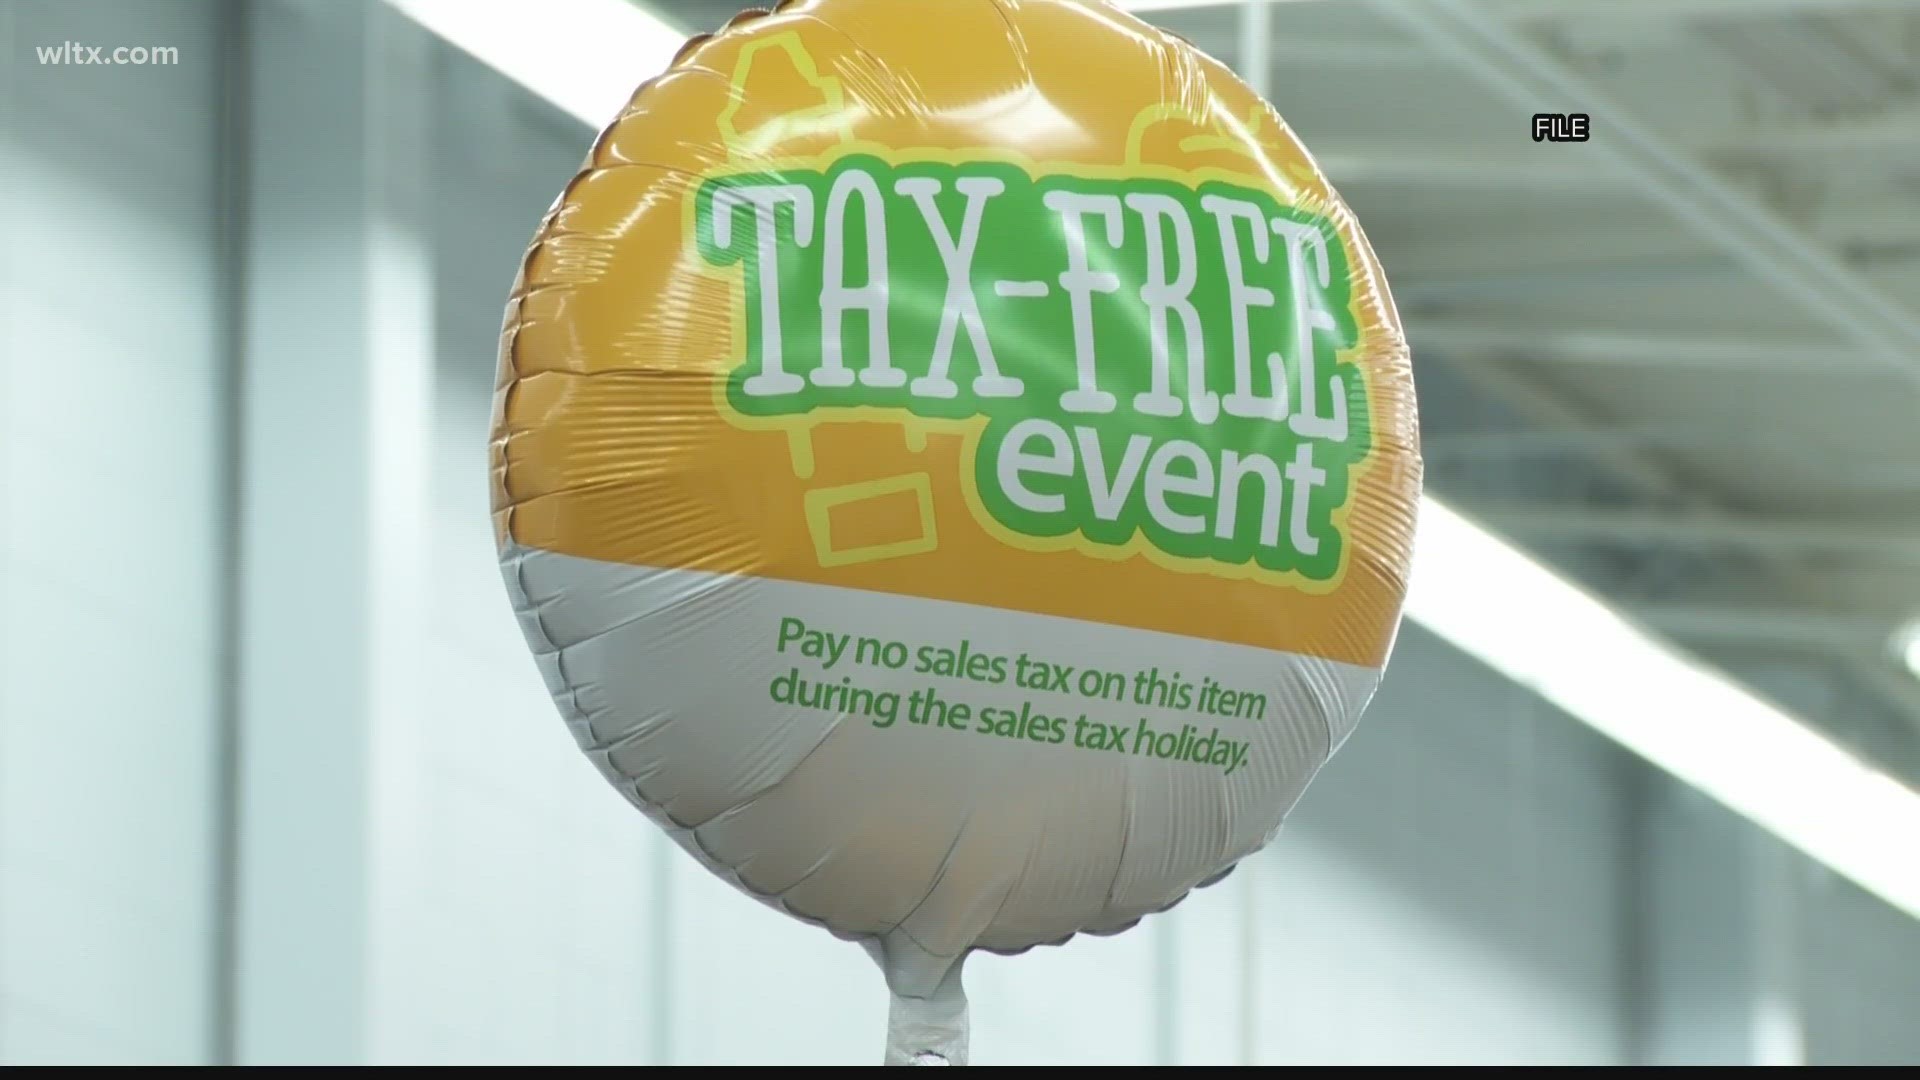 This year's tax free weekend runs from Friday, August 4 through Sunday, August 6.